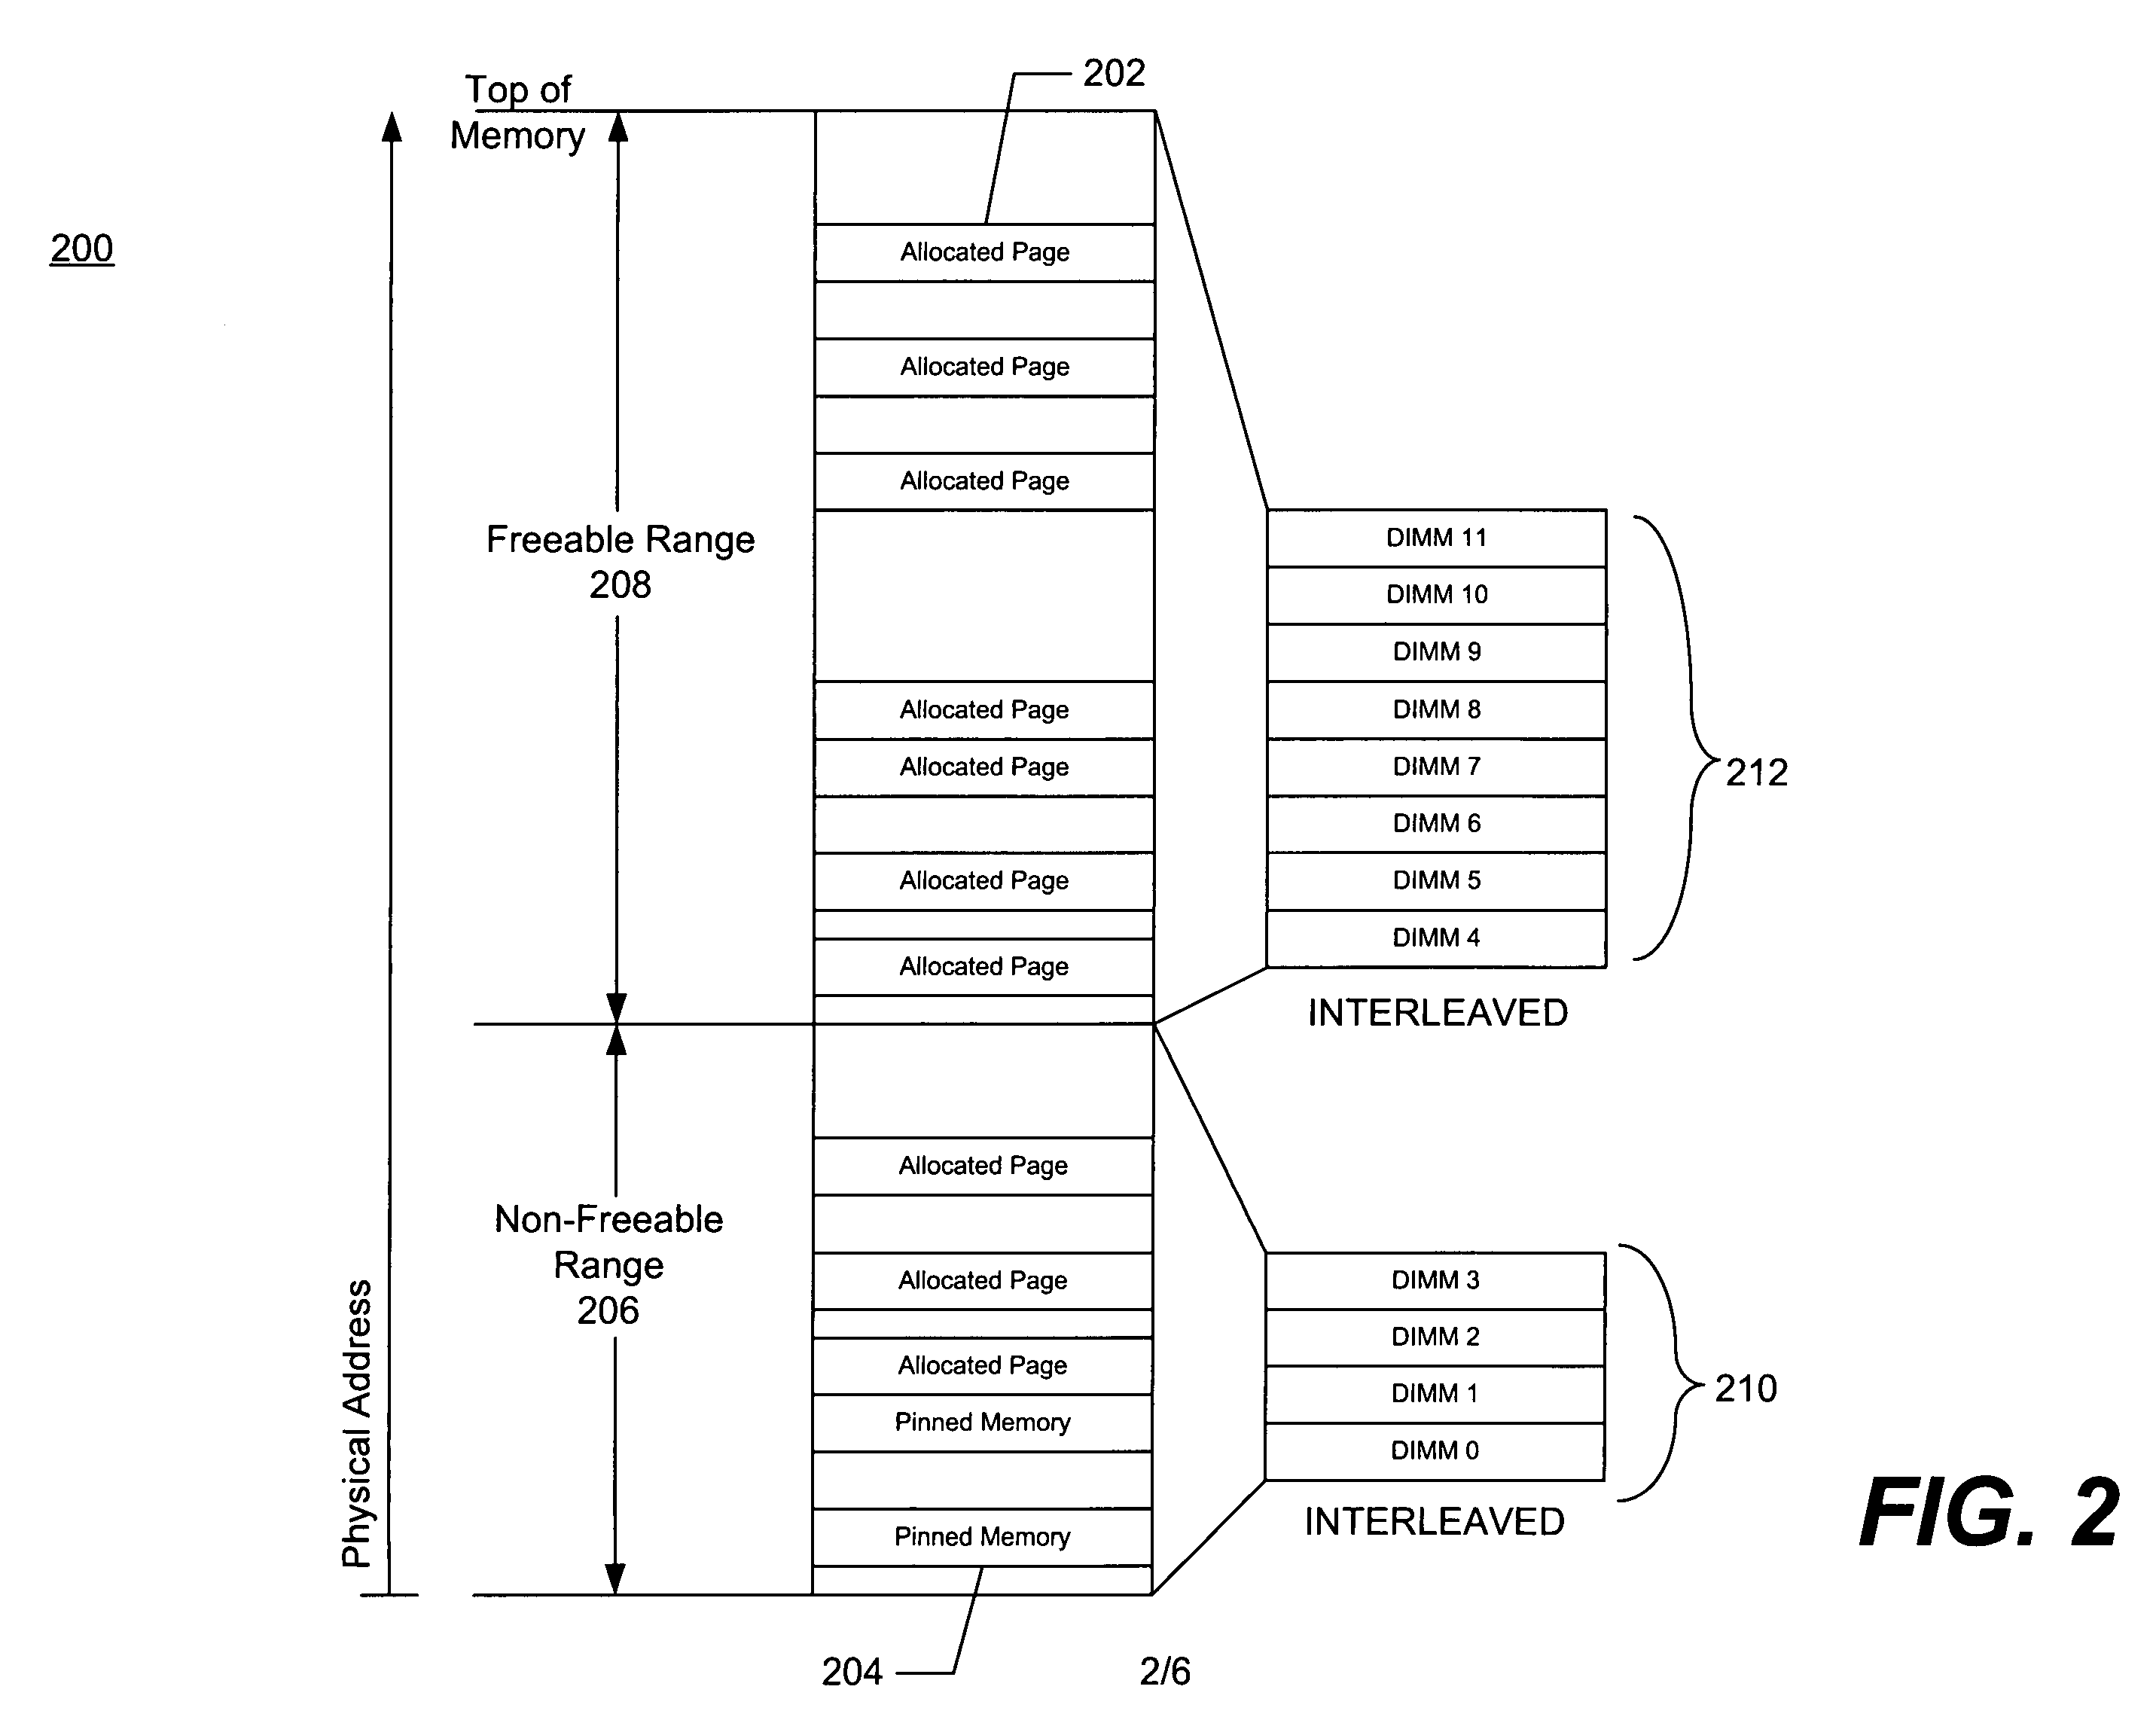 Method of sparing memory devices containing pinned memory